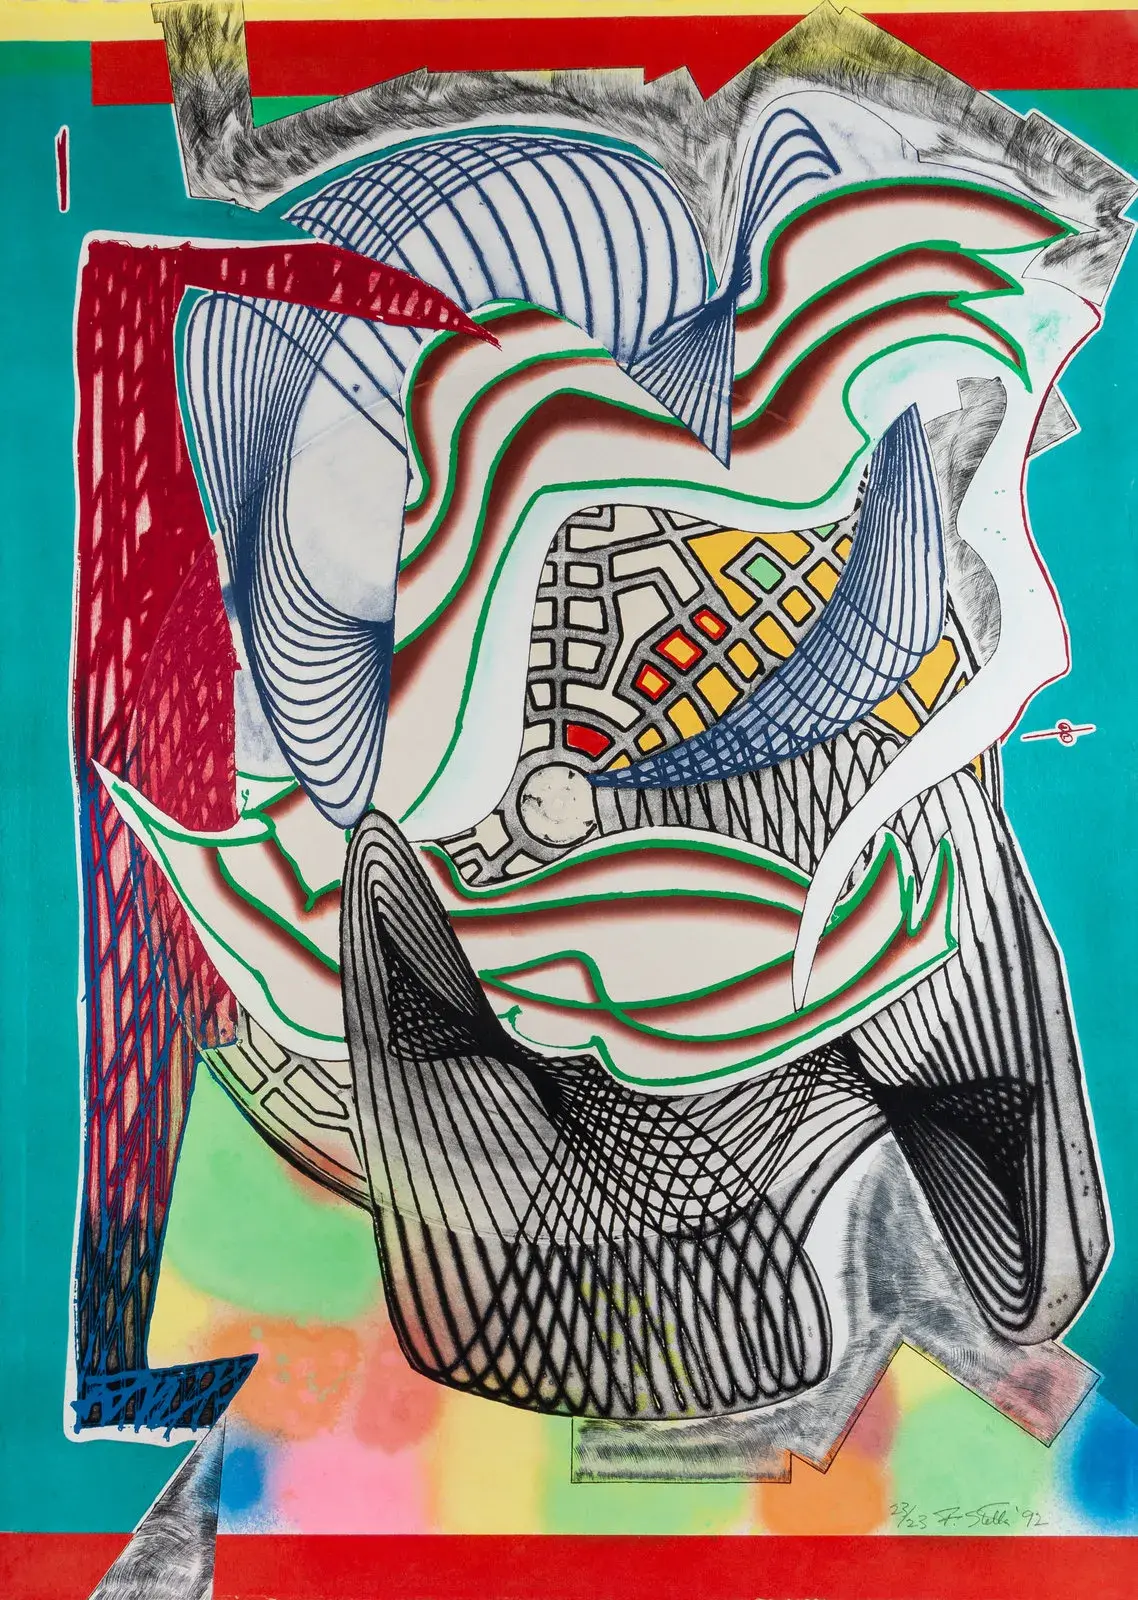 Frank Stella (American, b. 1936) The Funeral (Dome) (from the ‘Moby Dick (Domes)’ series), 1992